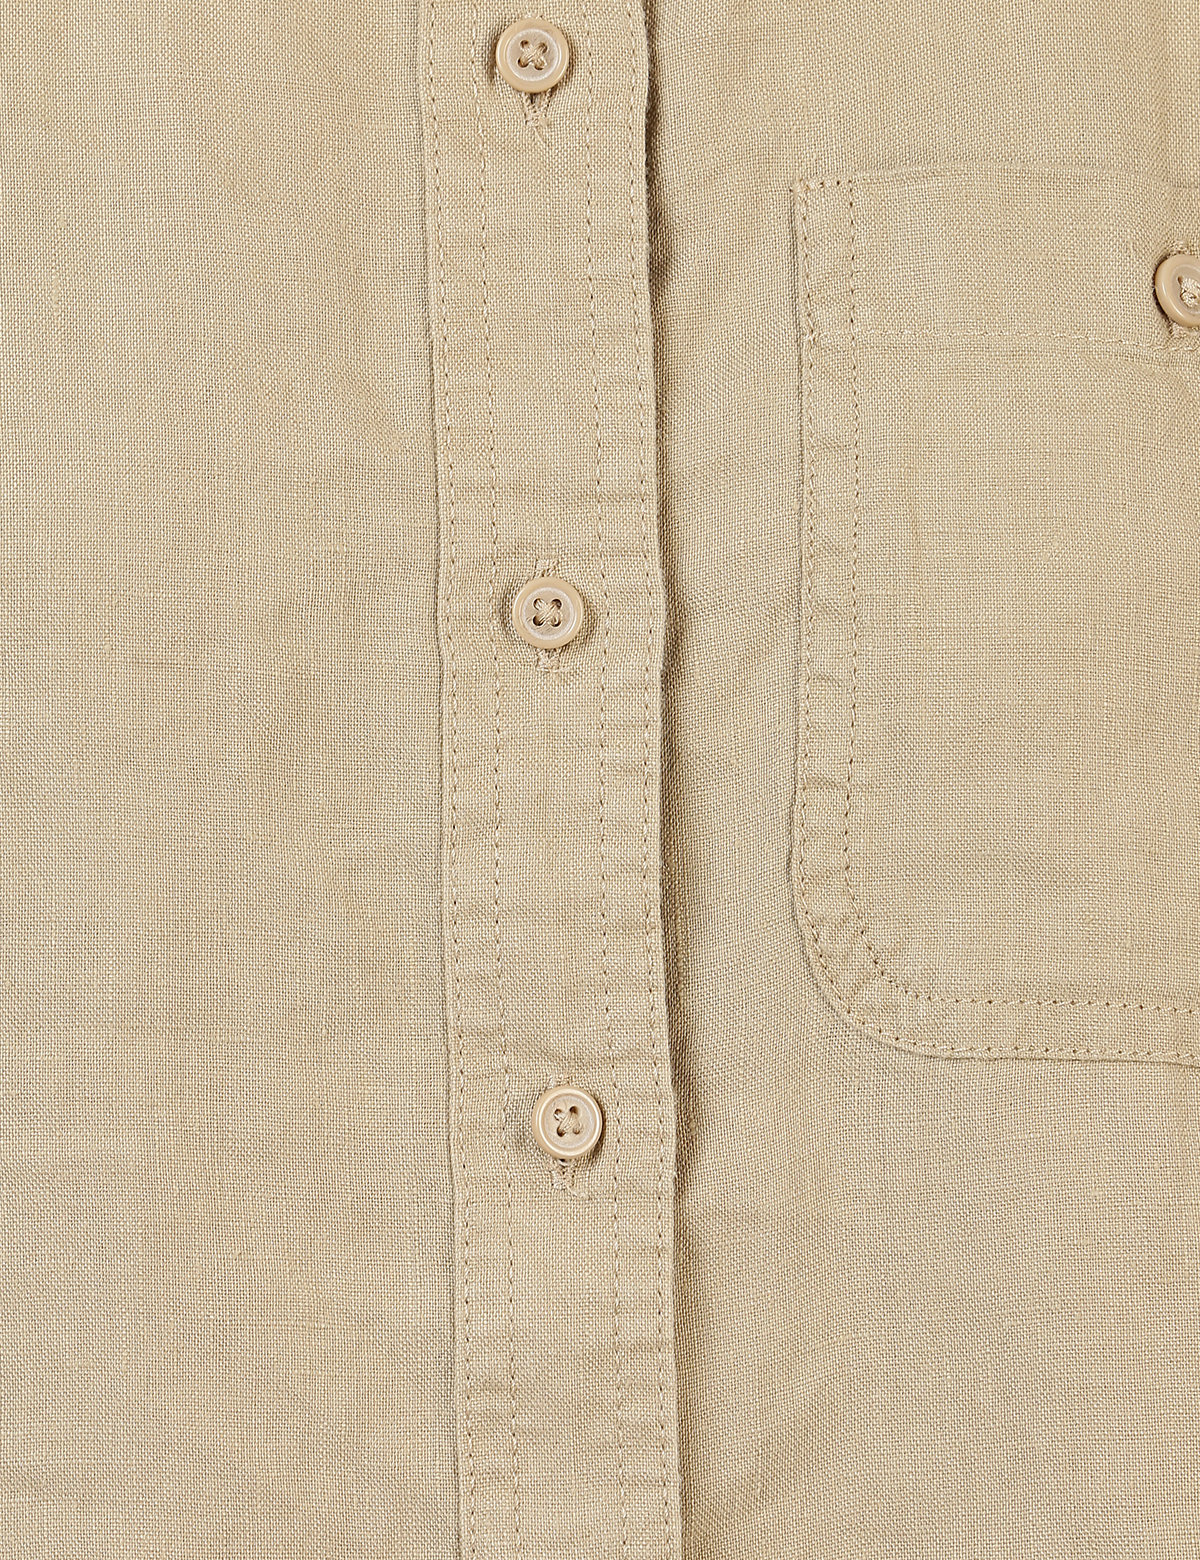 Pure Linen Styled Shirt